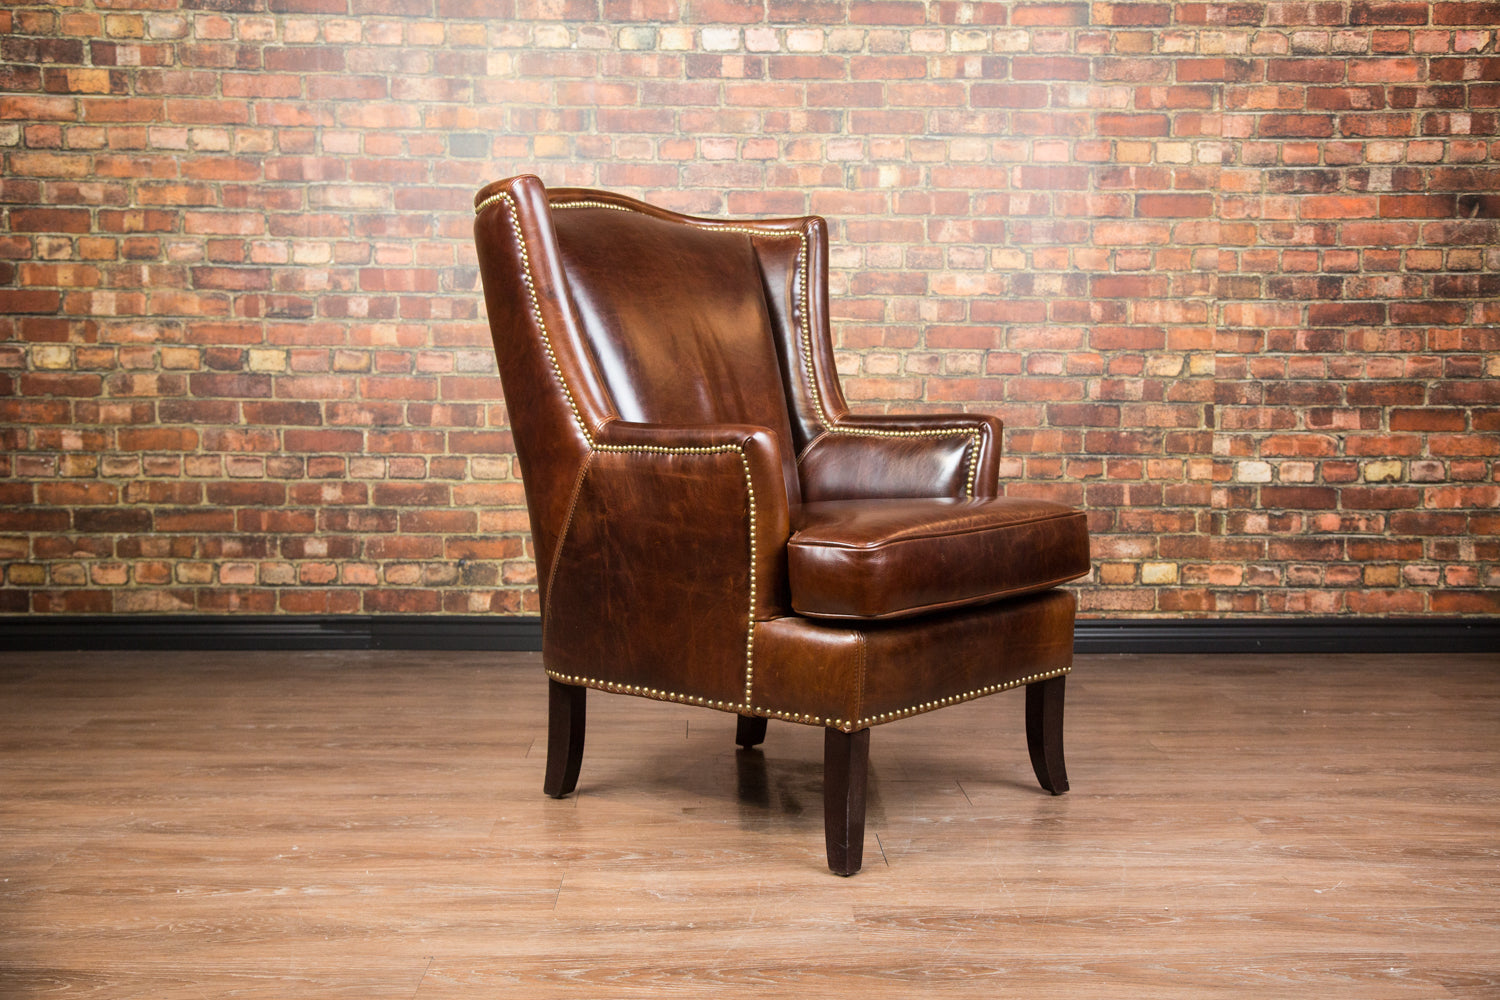 THE MANOR LEATHER CHAIR